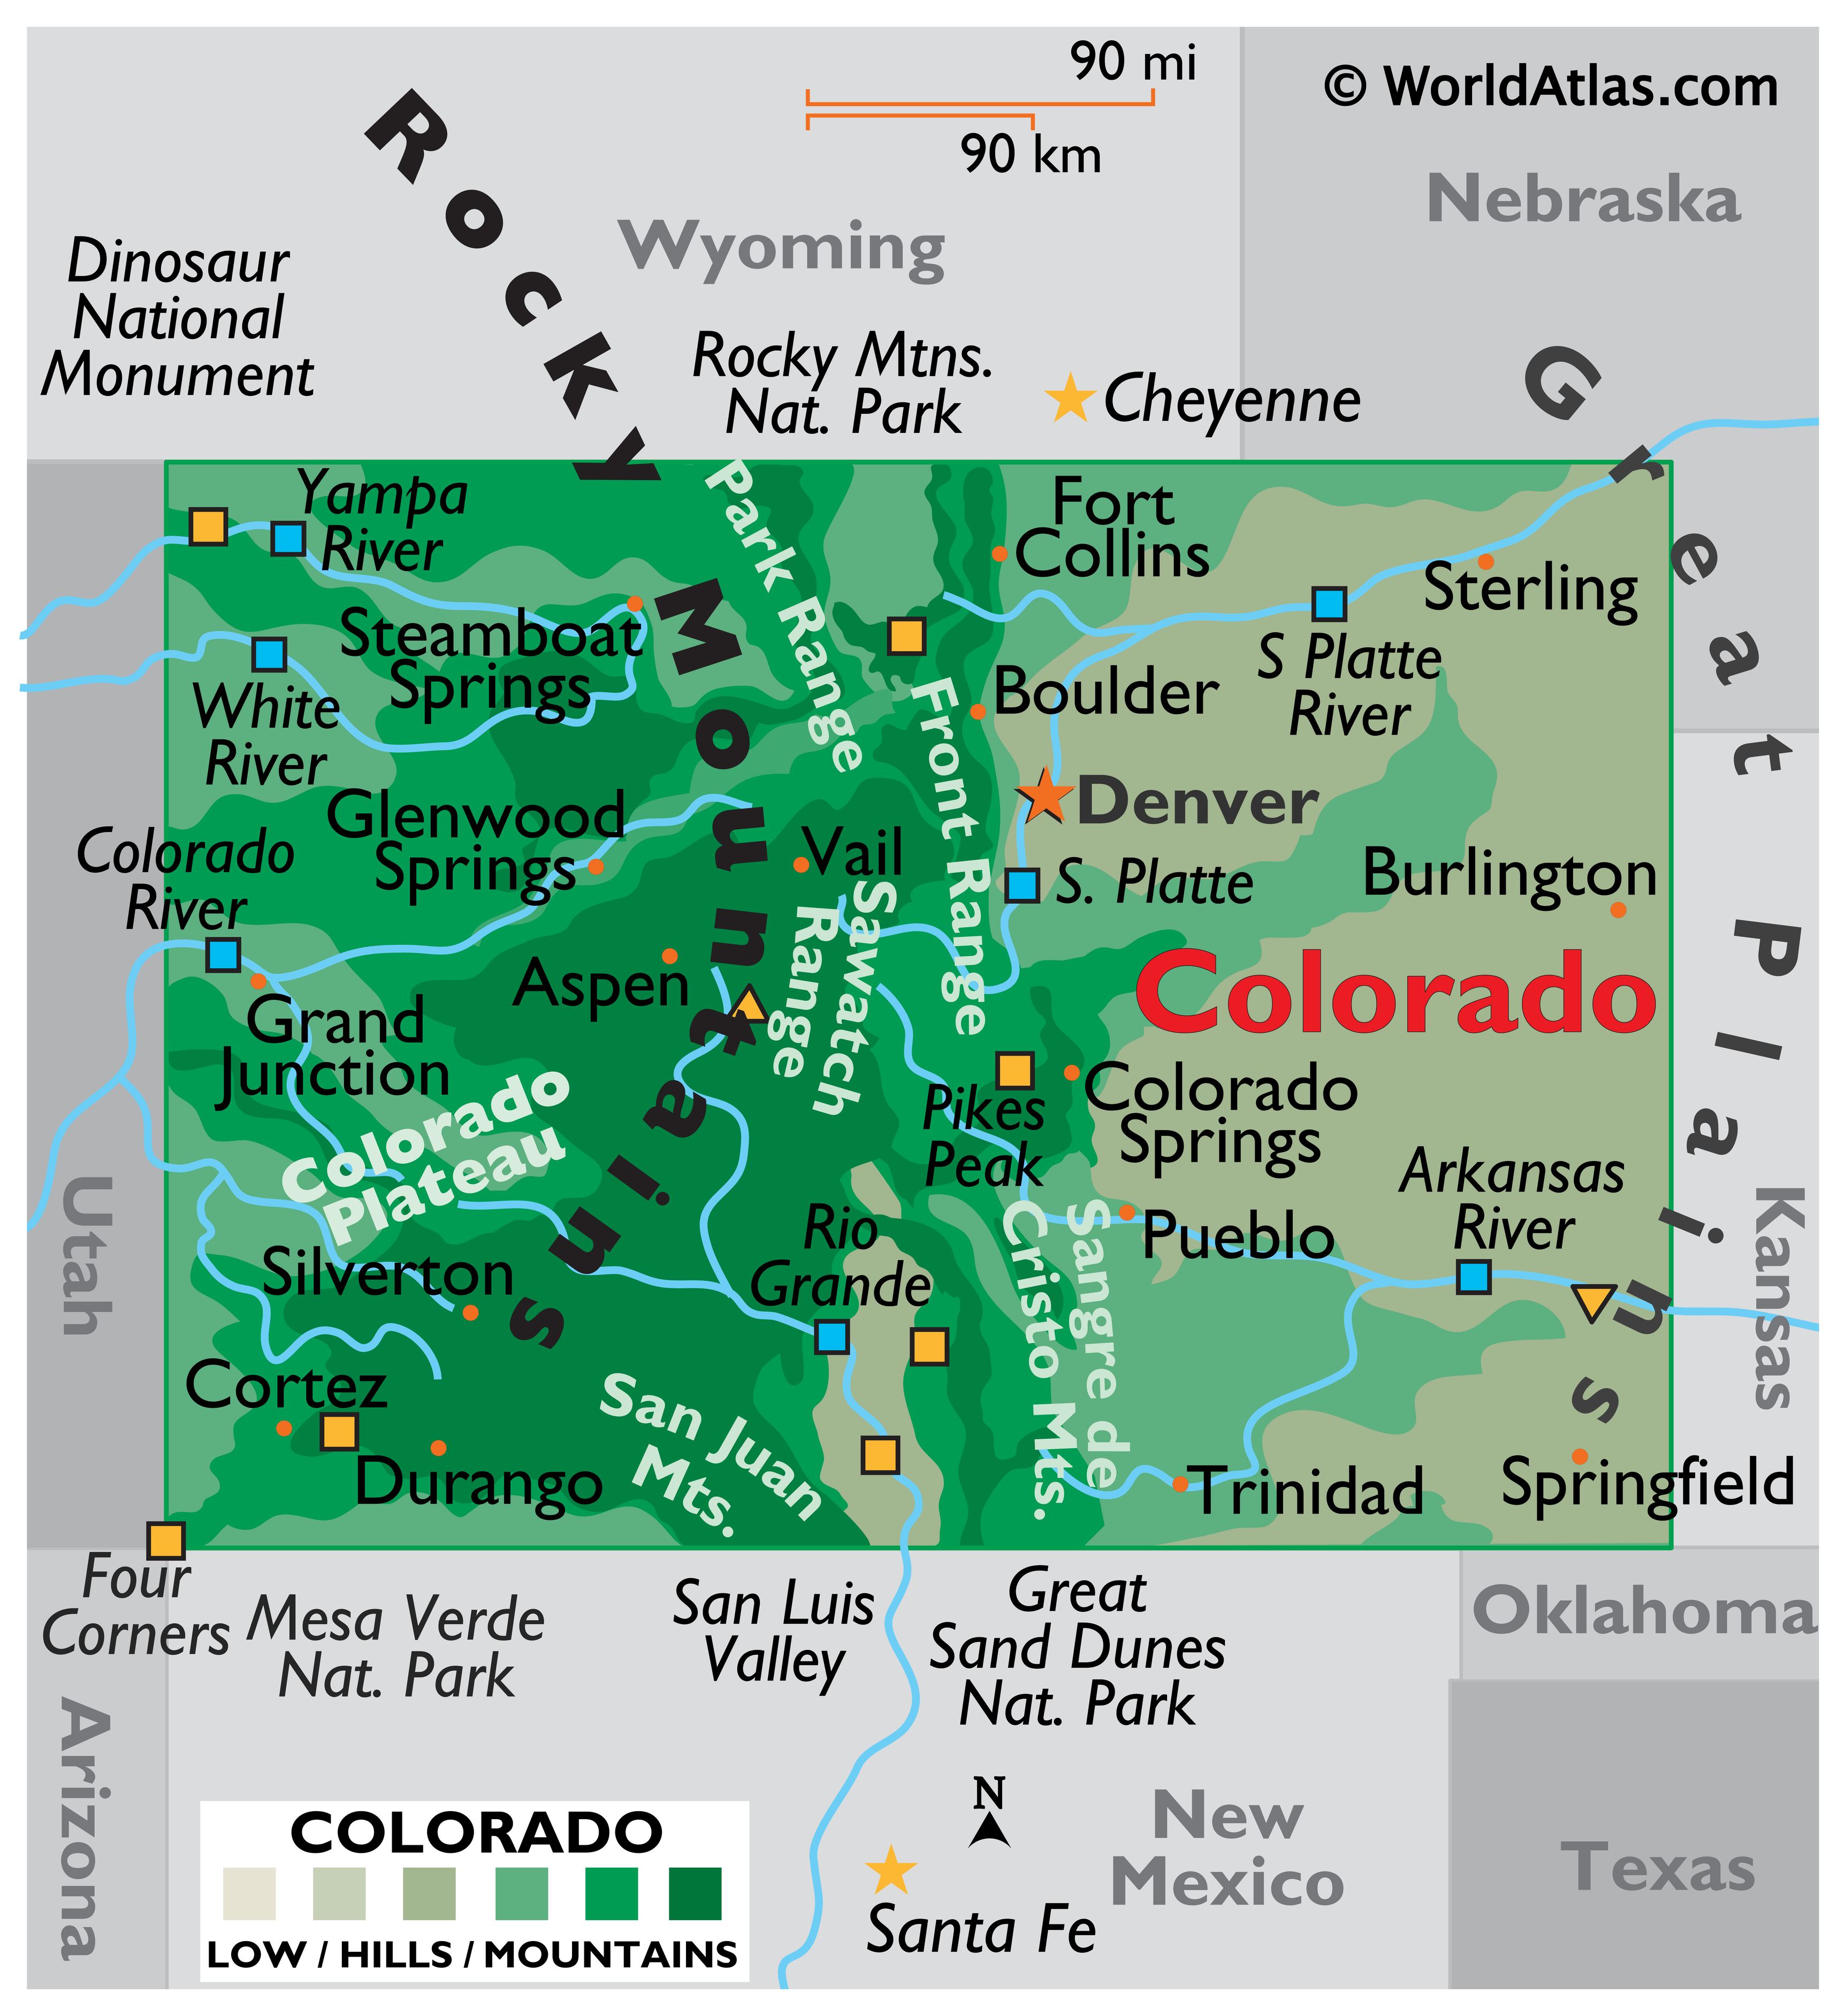 What is the elevation of Colorado Springs?